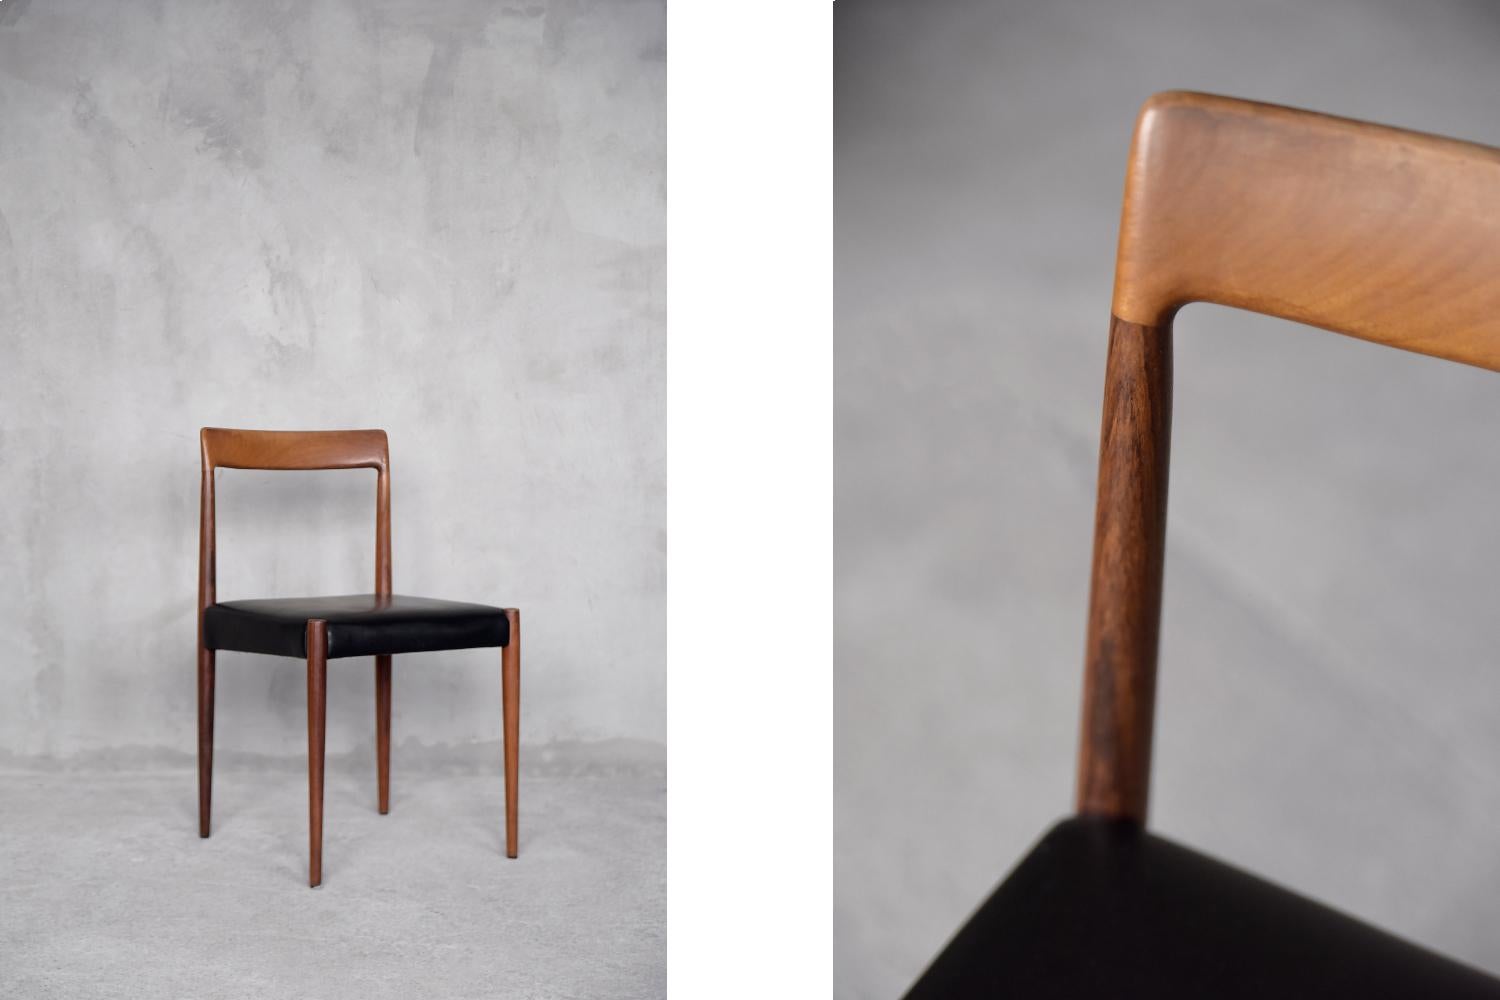 This modernist chair from the German manufacture Lübke, was produced during the 1960s. The frame of the chair is made of teak wood with a warm, brown color with clearly marked interesting graining. The seat has been refurbished and is upholstered in